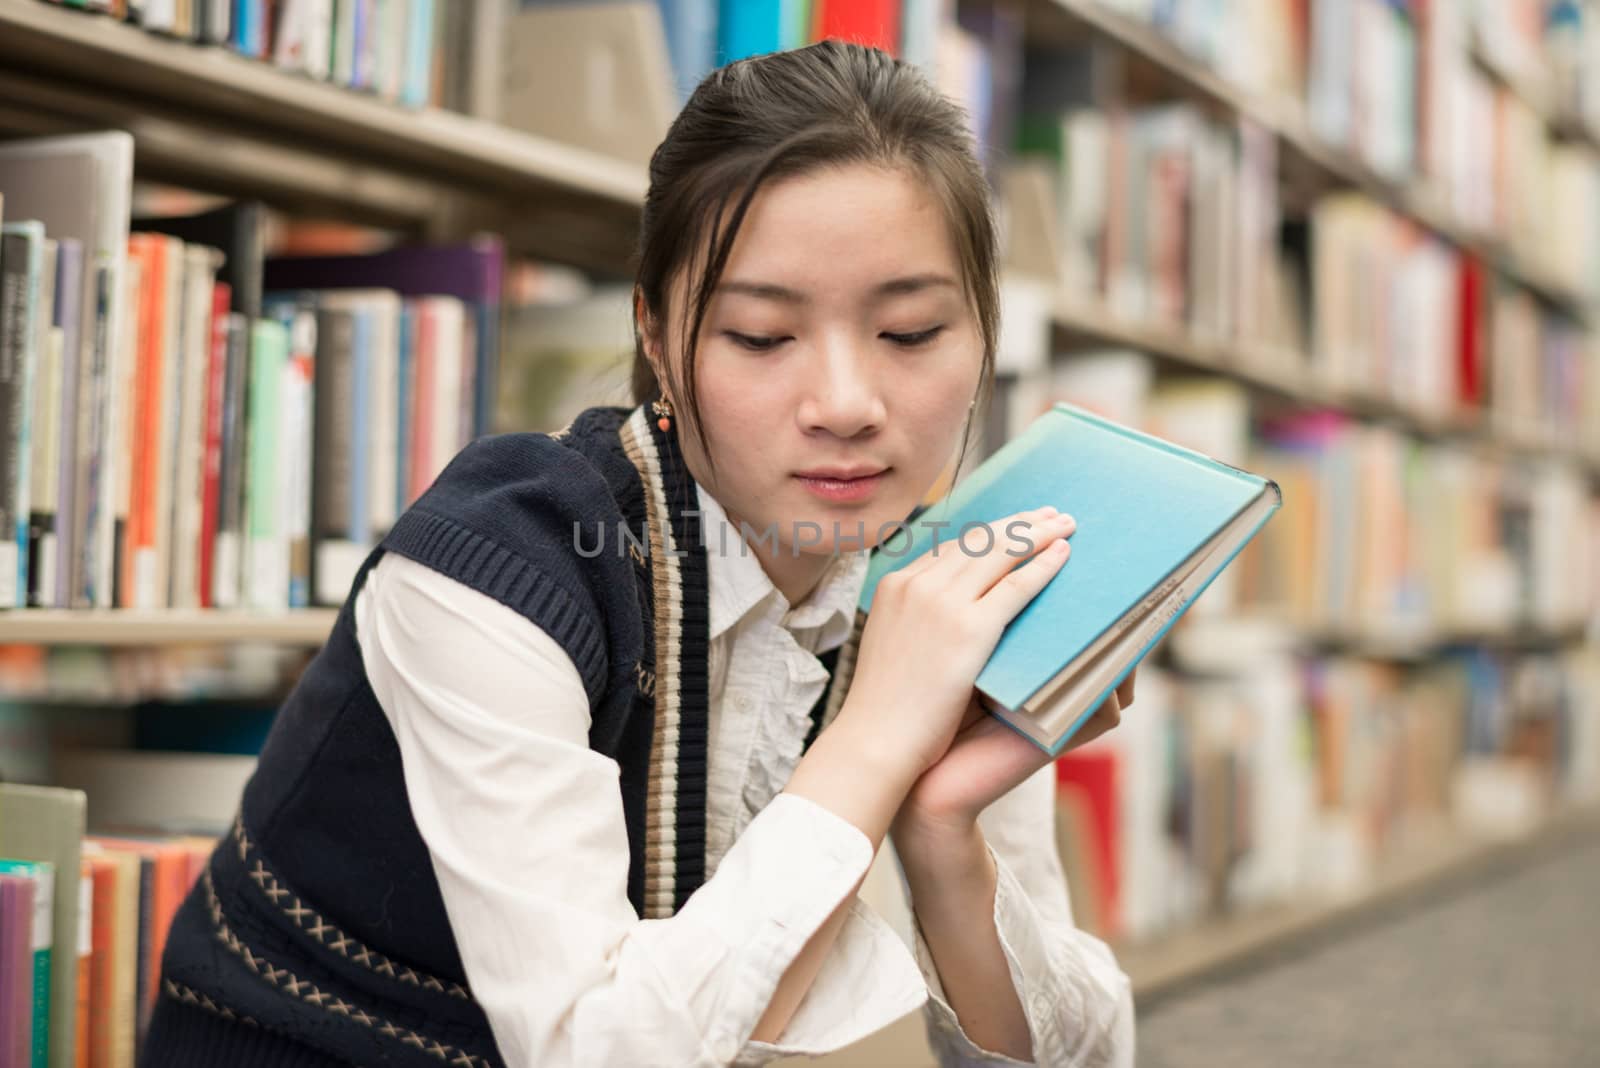 Upset young attractive woman holding a book while sitting in front of a bookshelf